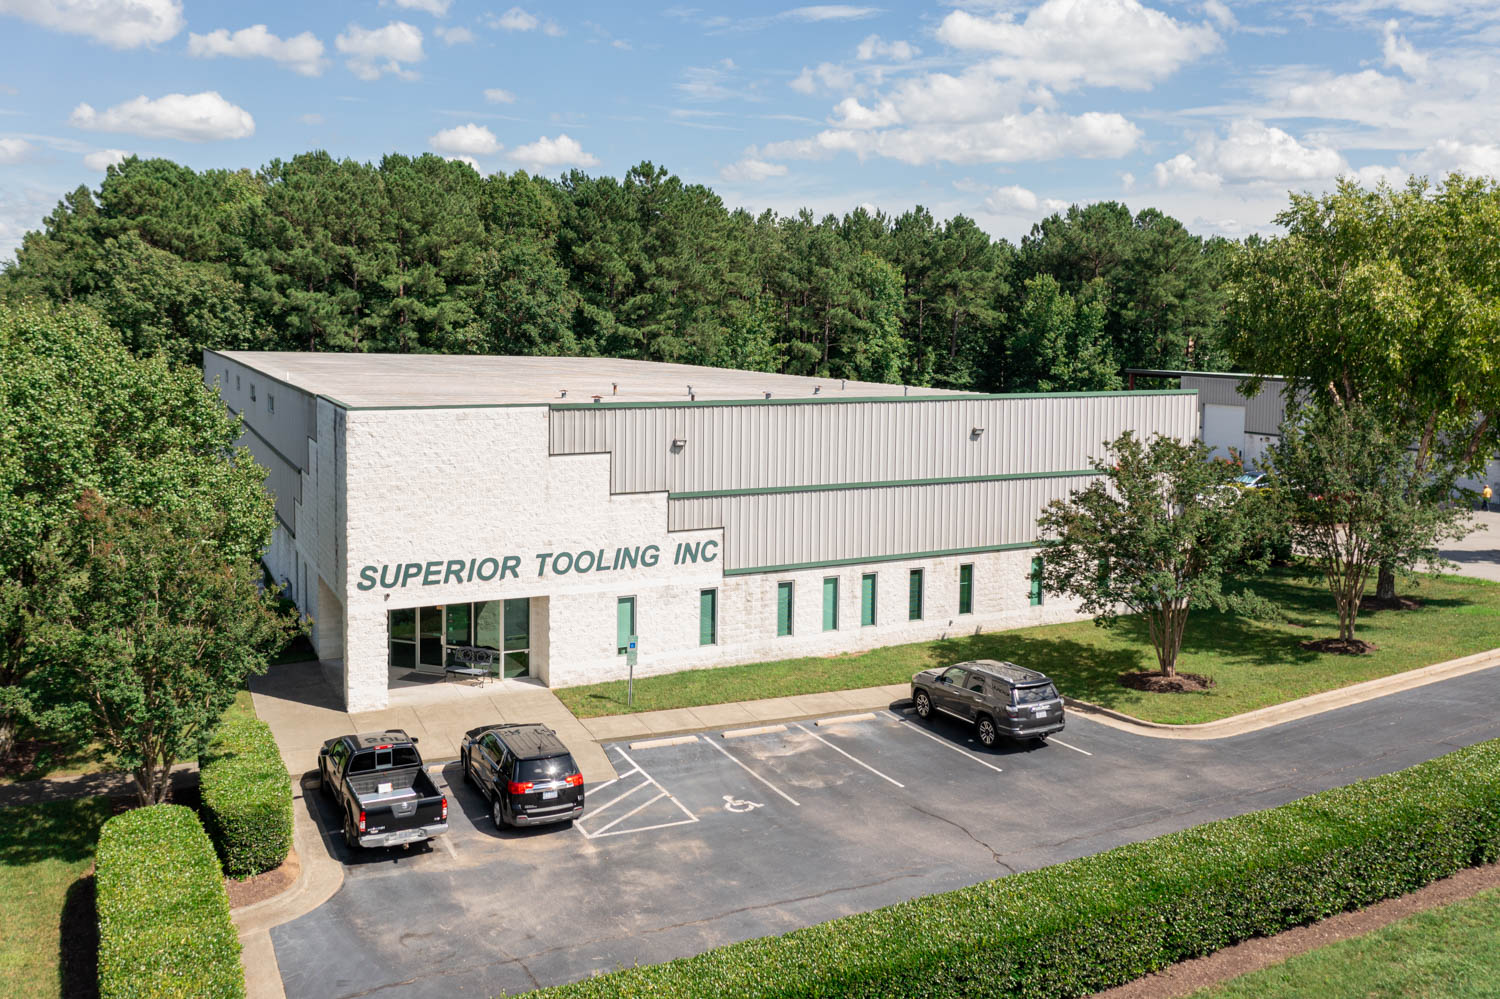 Superior Tooling includes a tech center for customer development and tryout